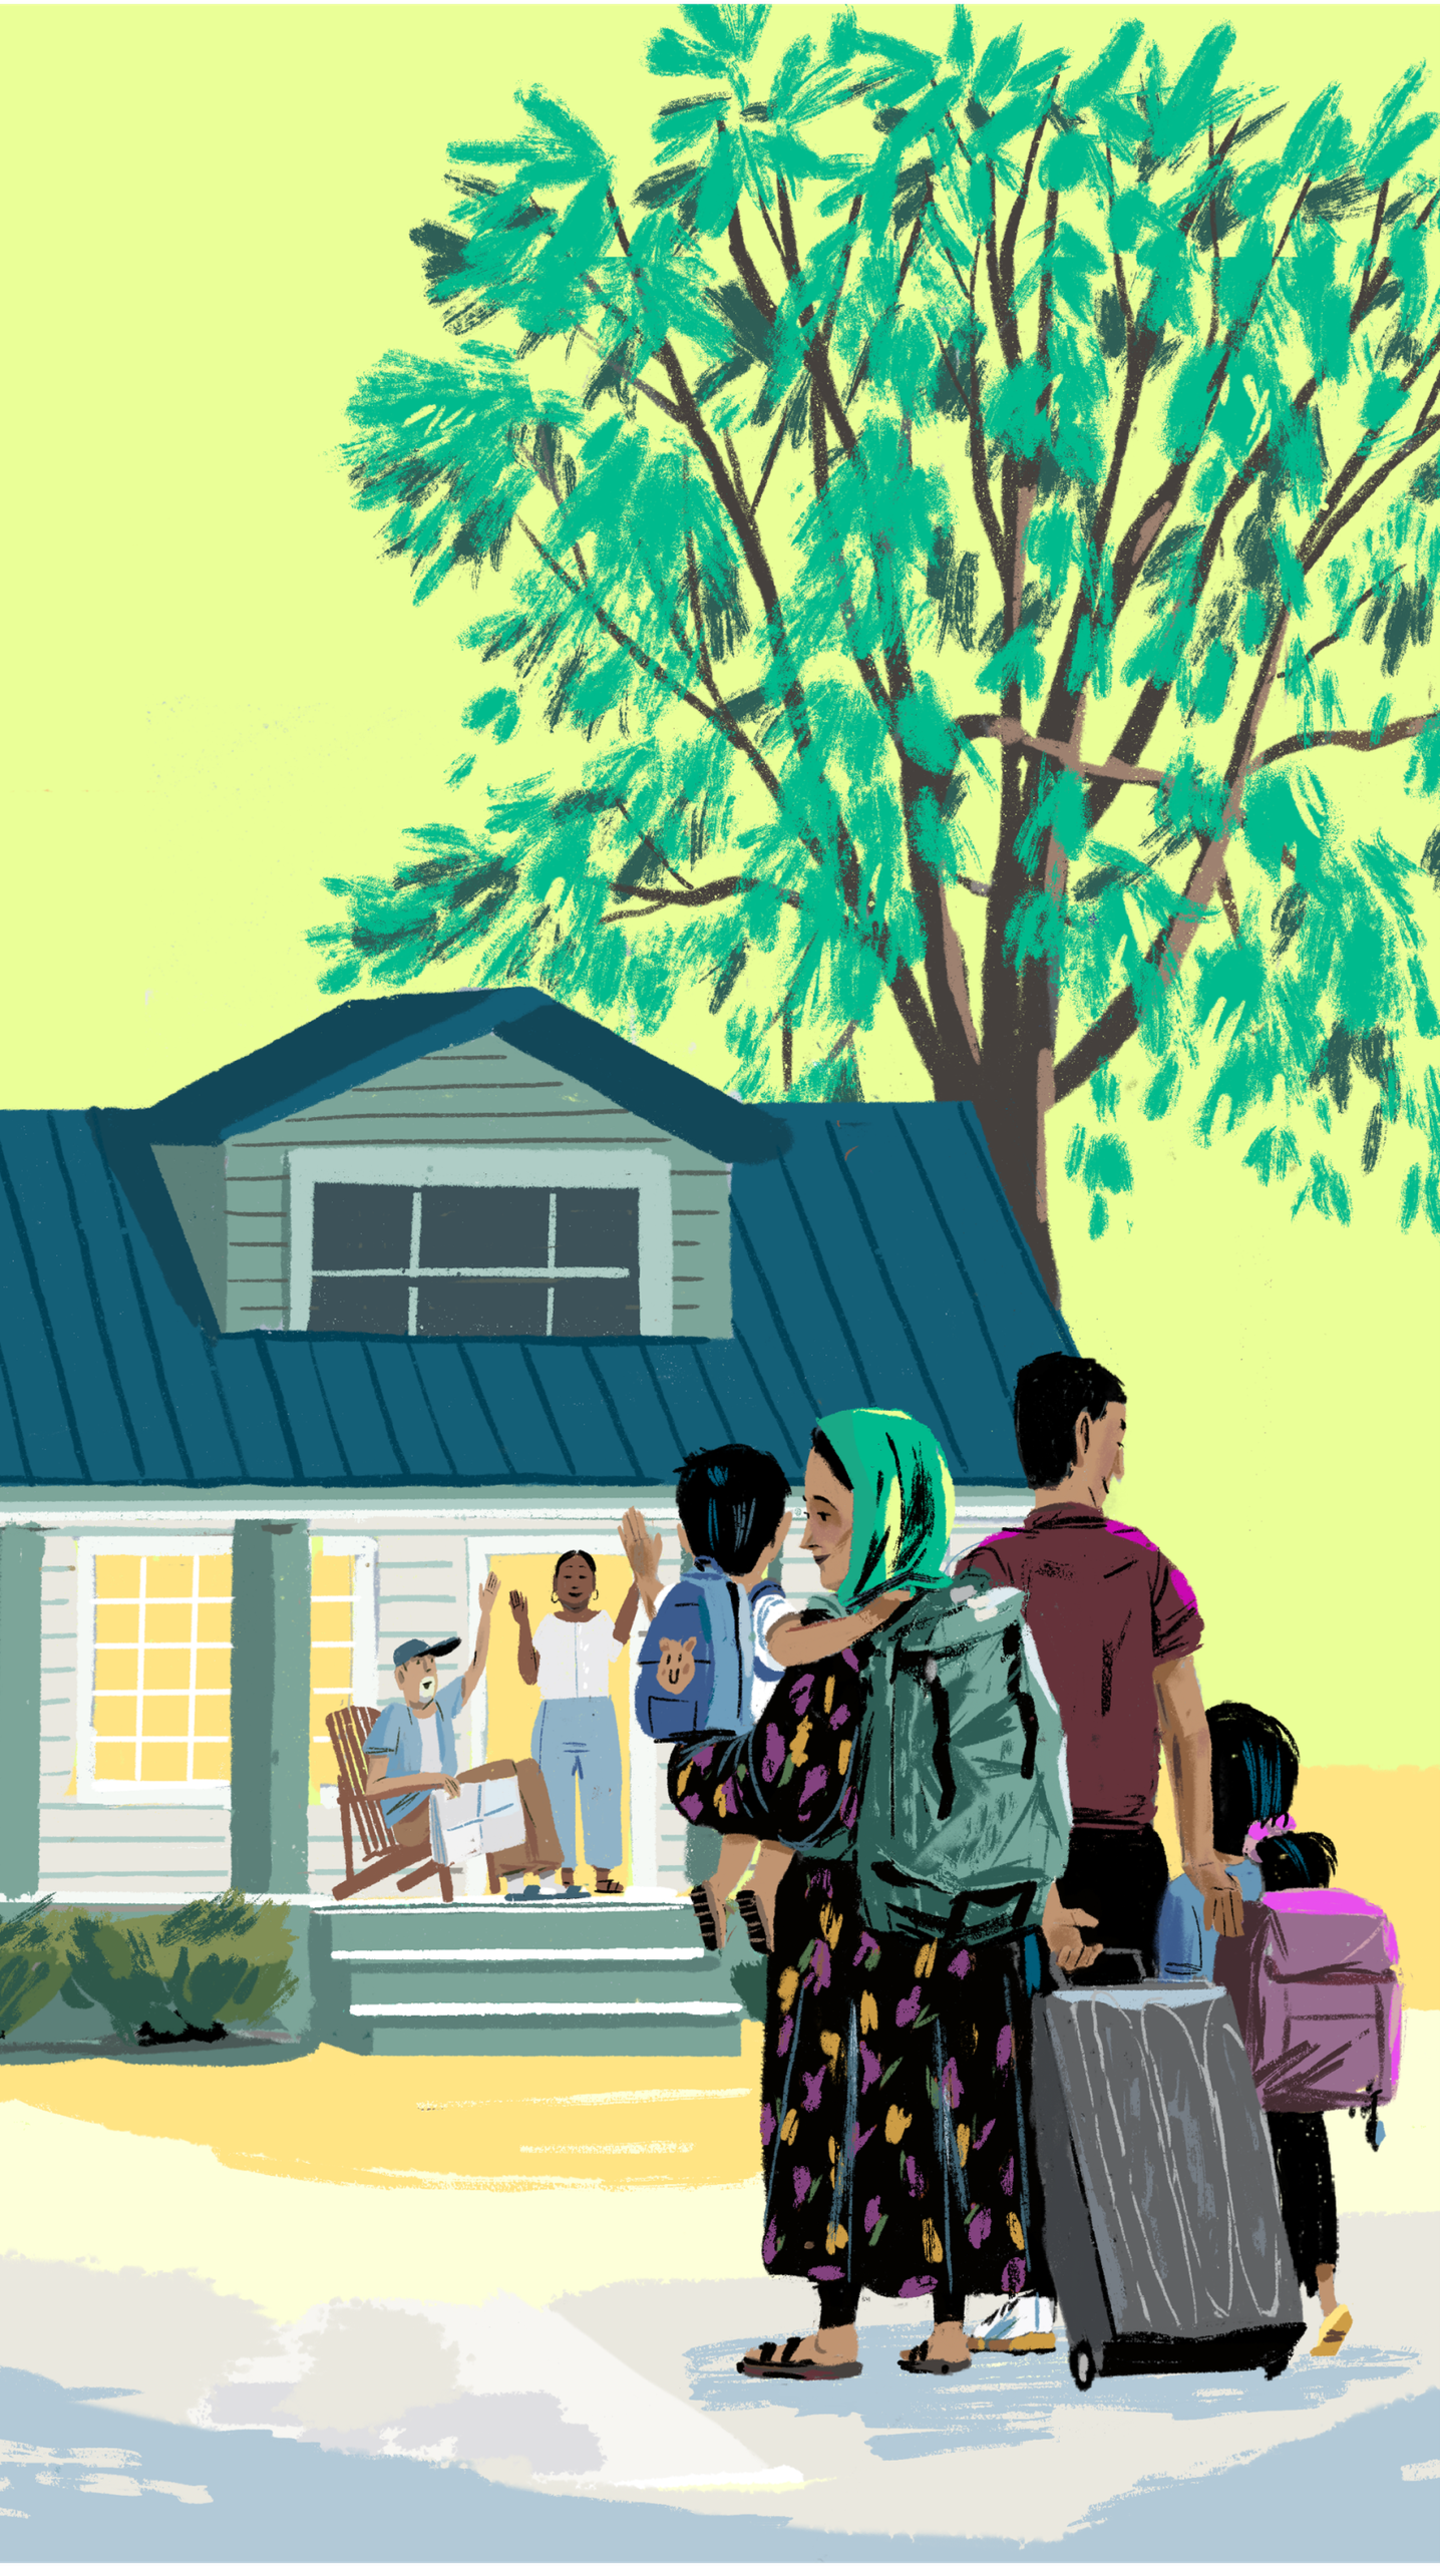 Drawing of two people on their porch, waving at an approaching family with kids and luggage. The mom wears a headscarf.